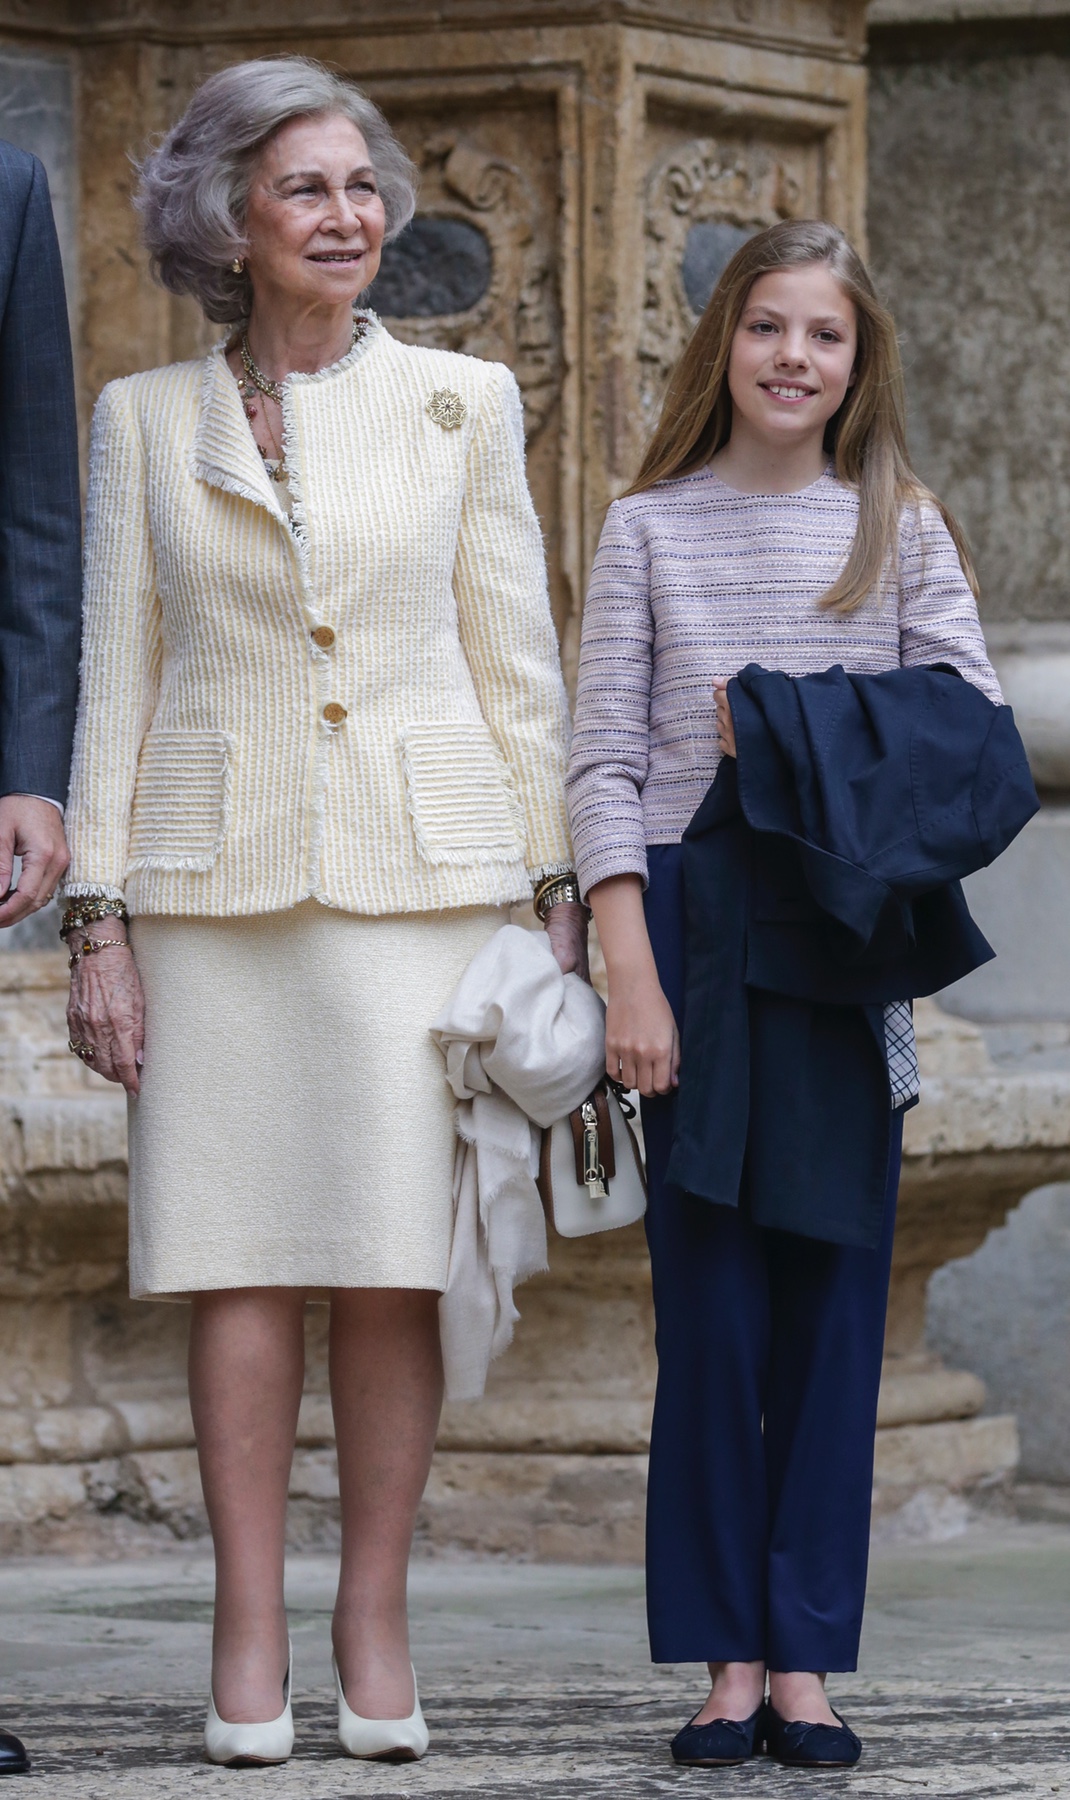 Spanish Royals Attend Easter Mass in Palma de Mallorca – The Real My Royals